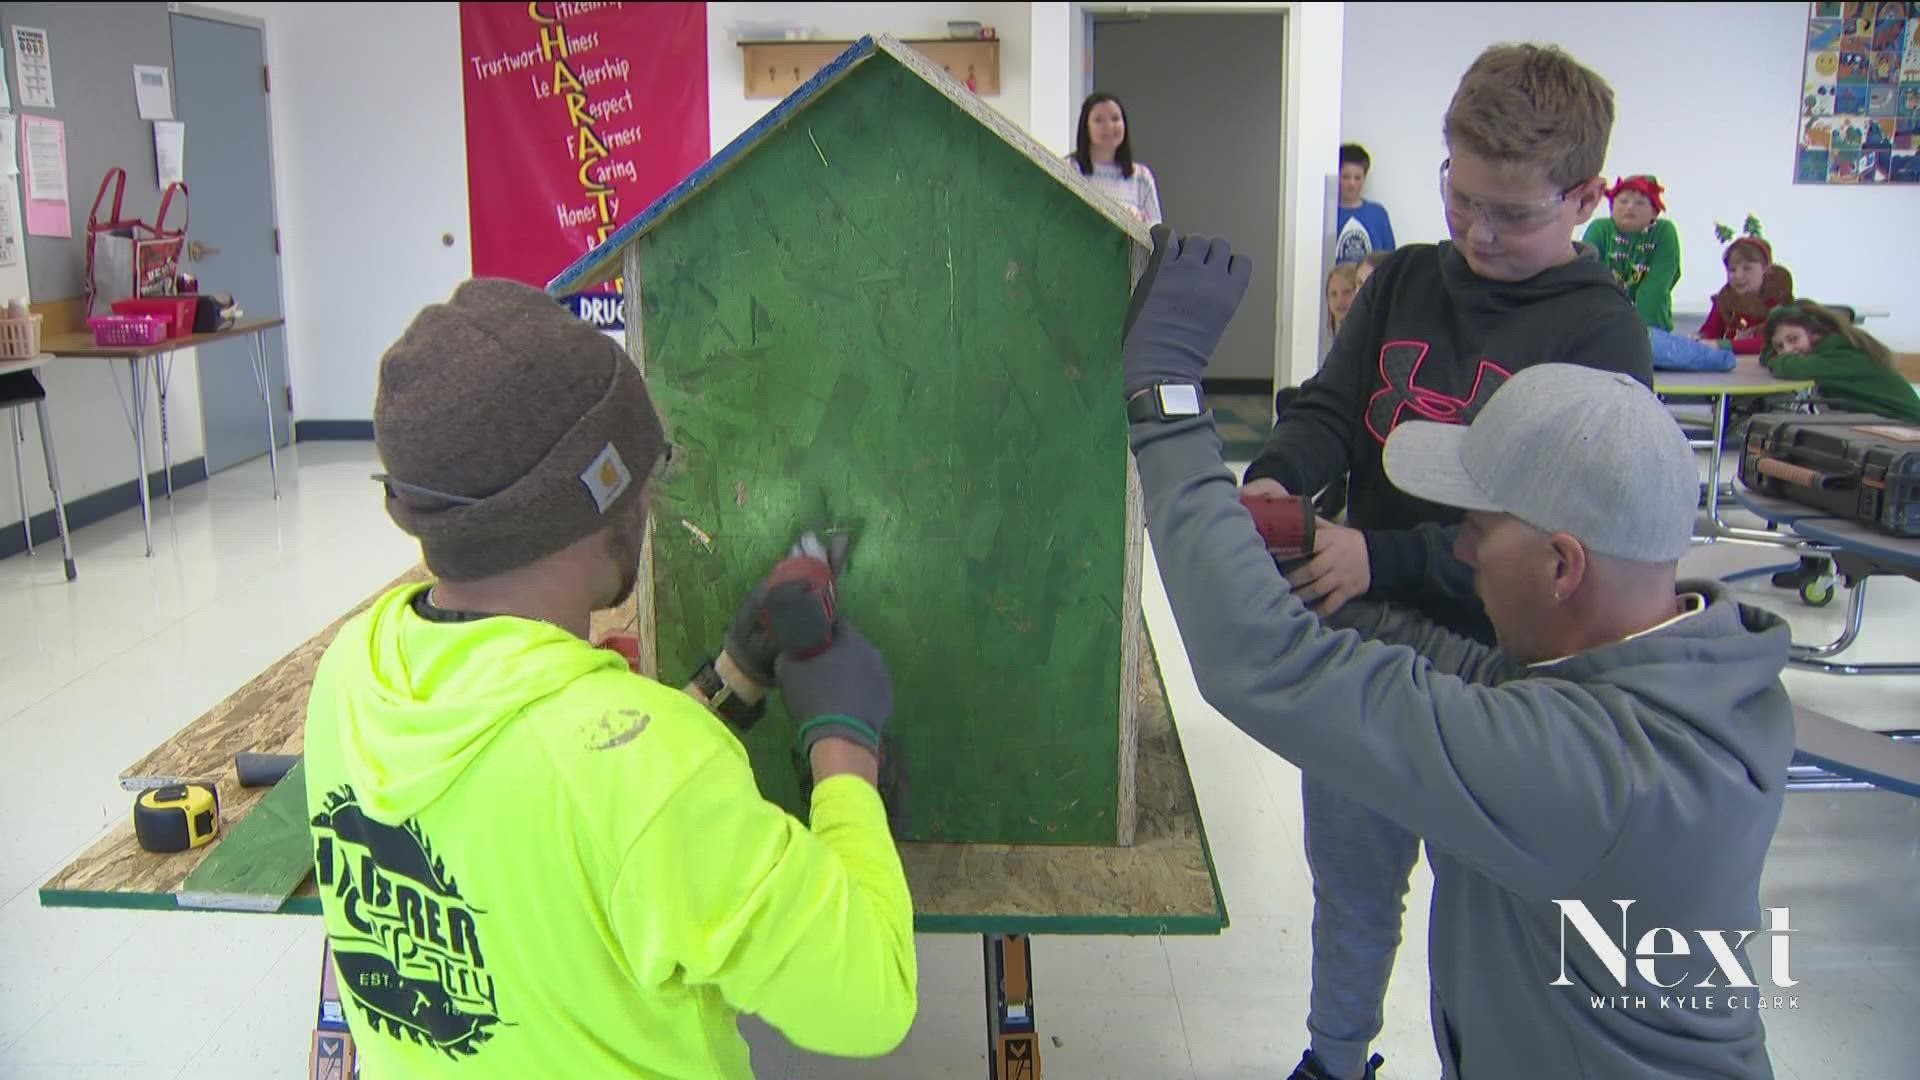 3rd graders in Littleton saw their little library project get accidentally blown up by fireworks, but it didn't quell their desire to make a new one before Christmas